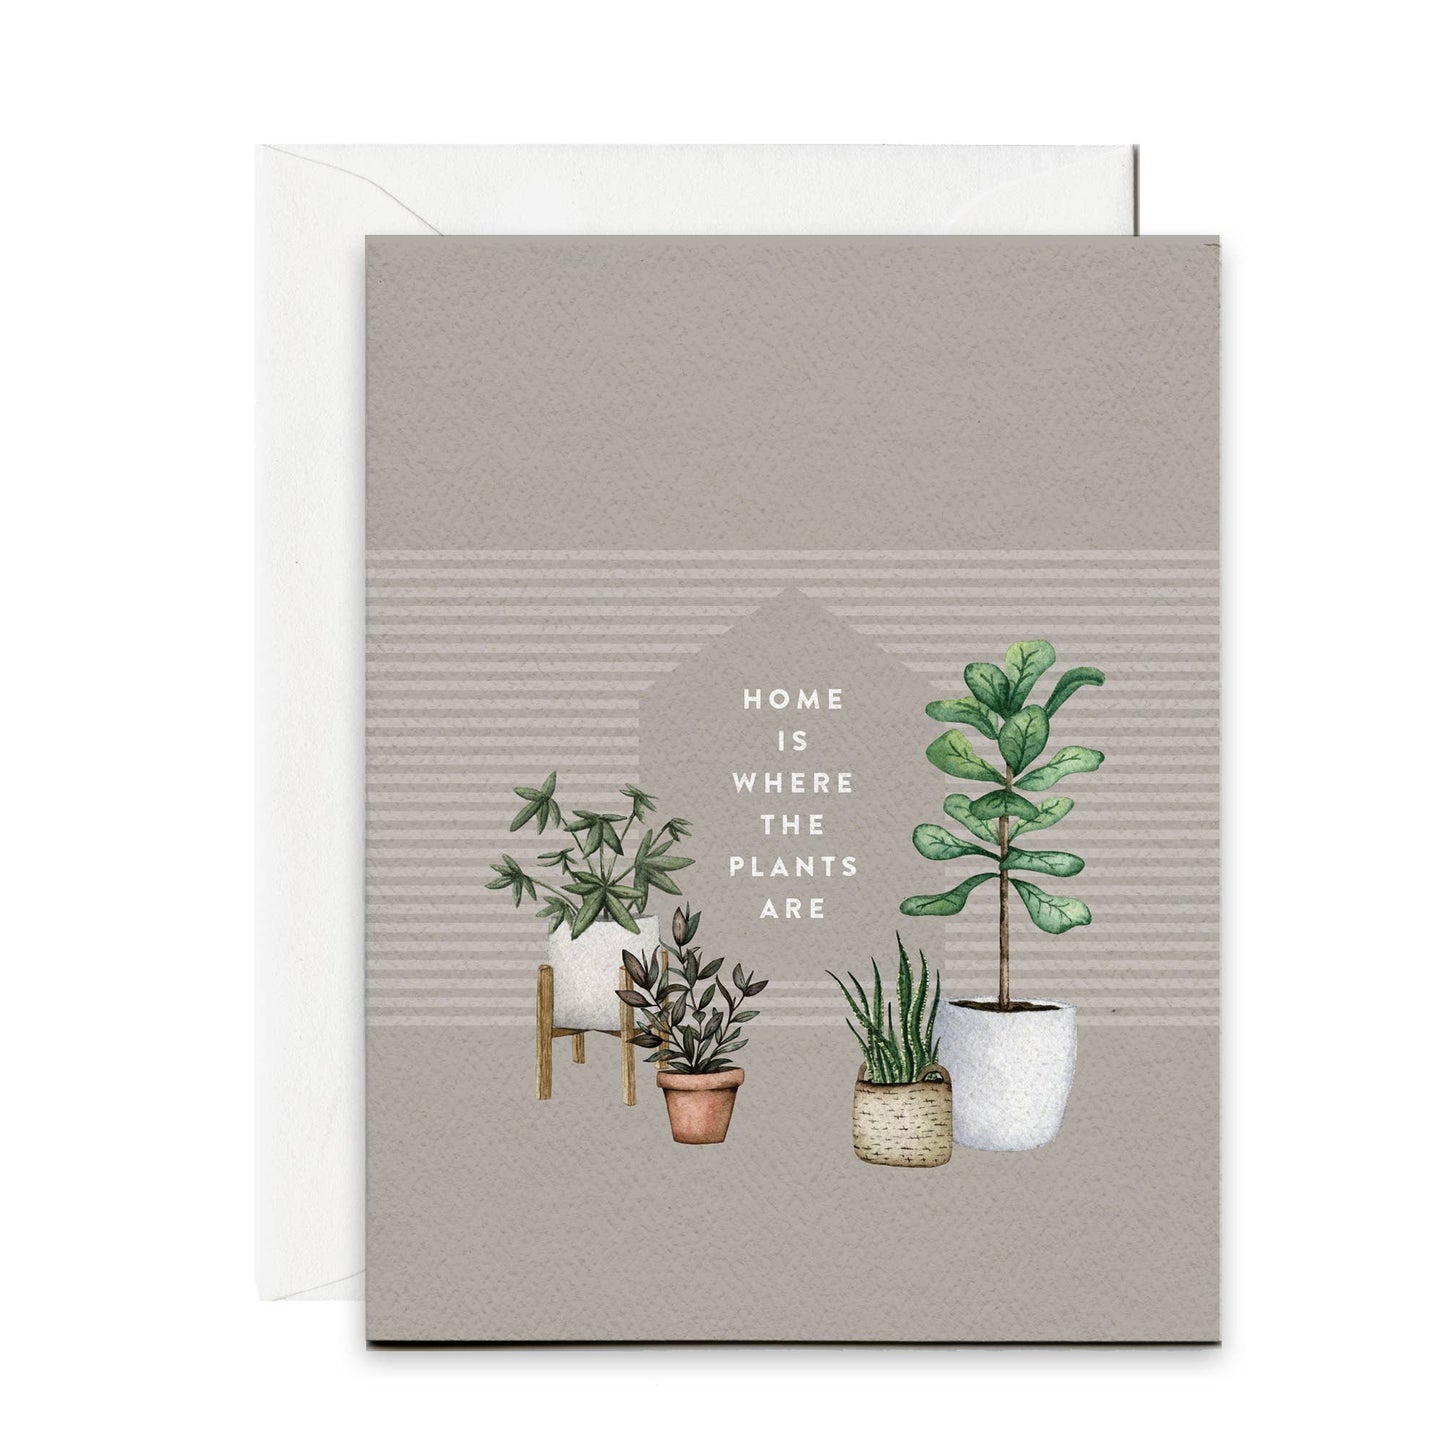 Home is Where the Plants Are Card by Pip & Cricket